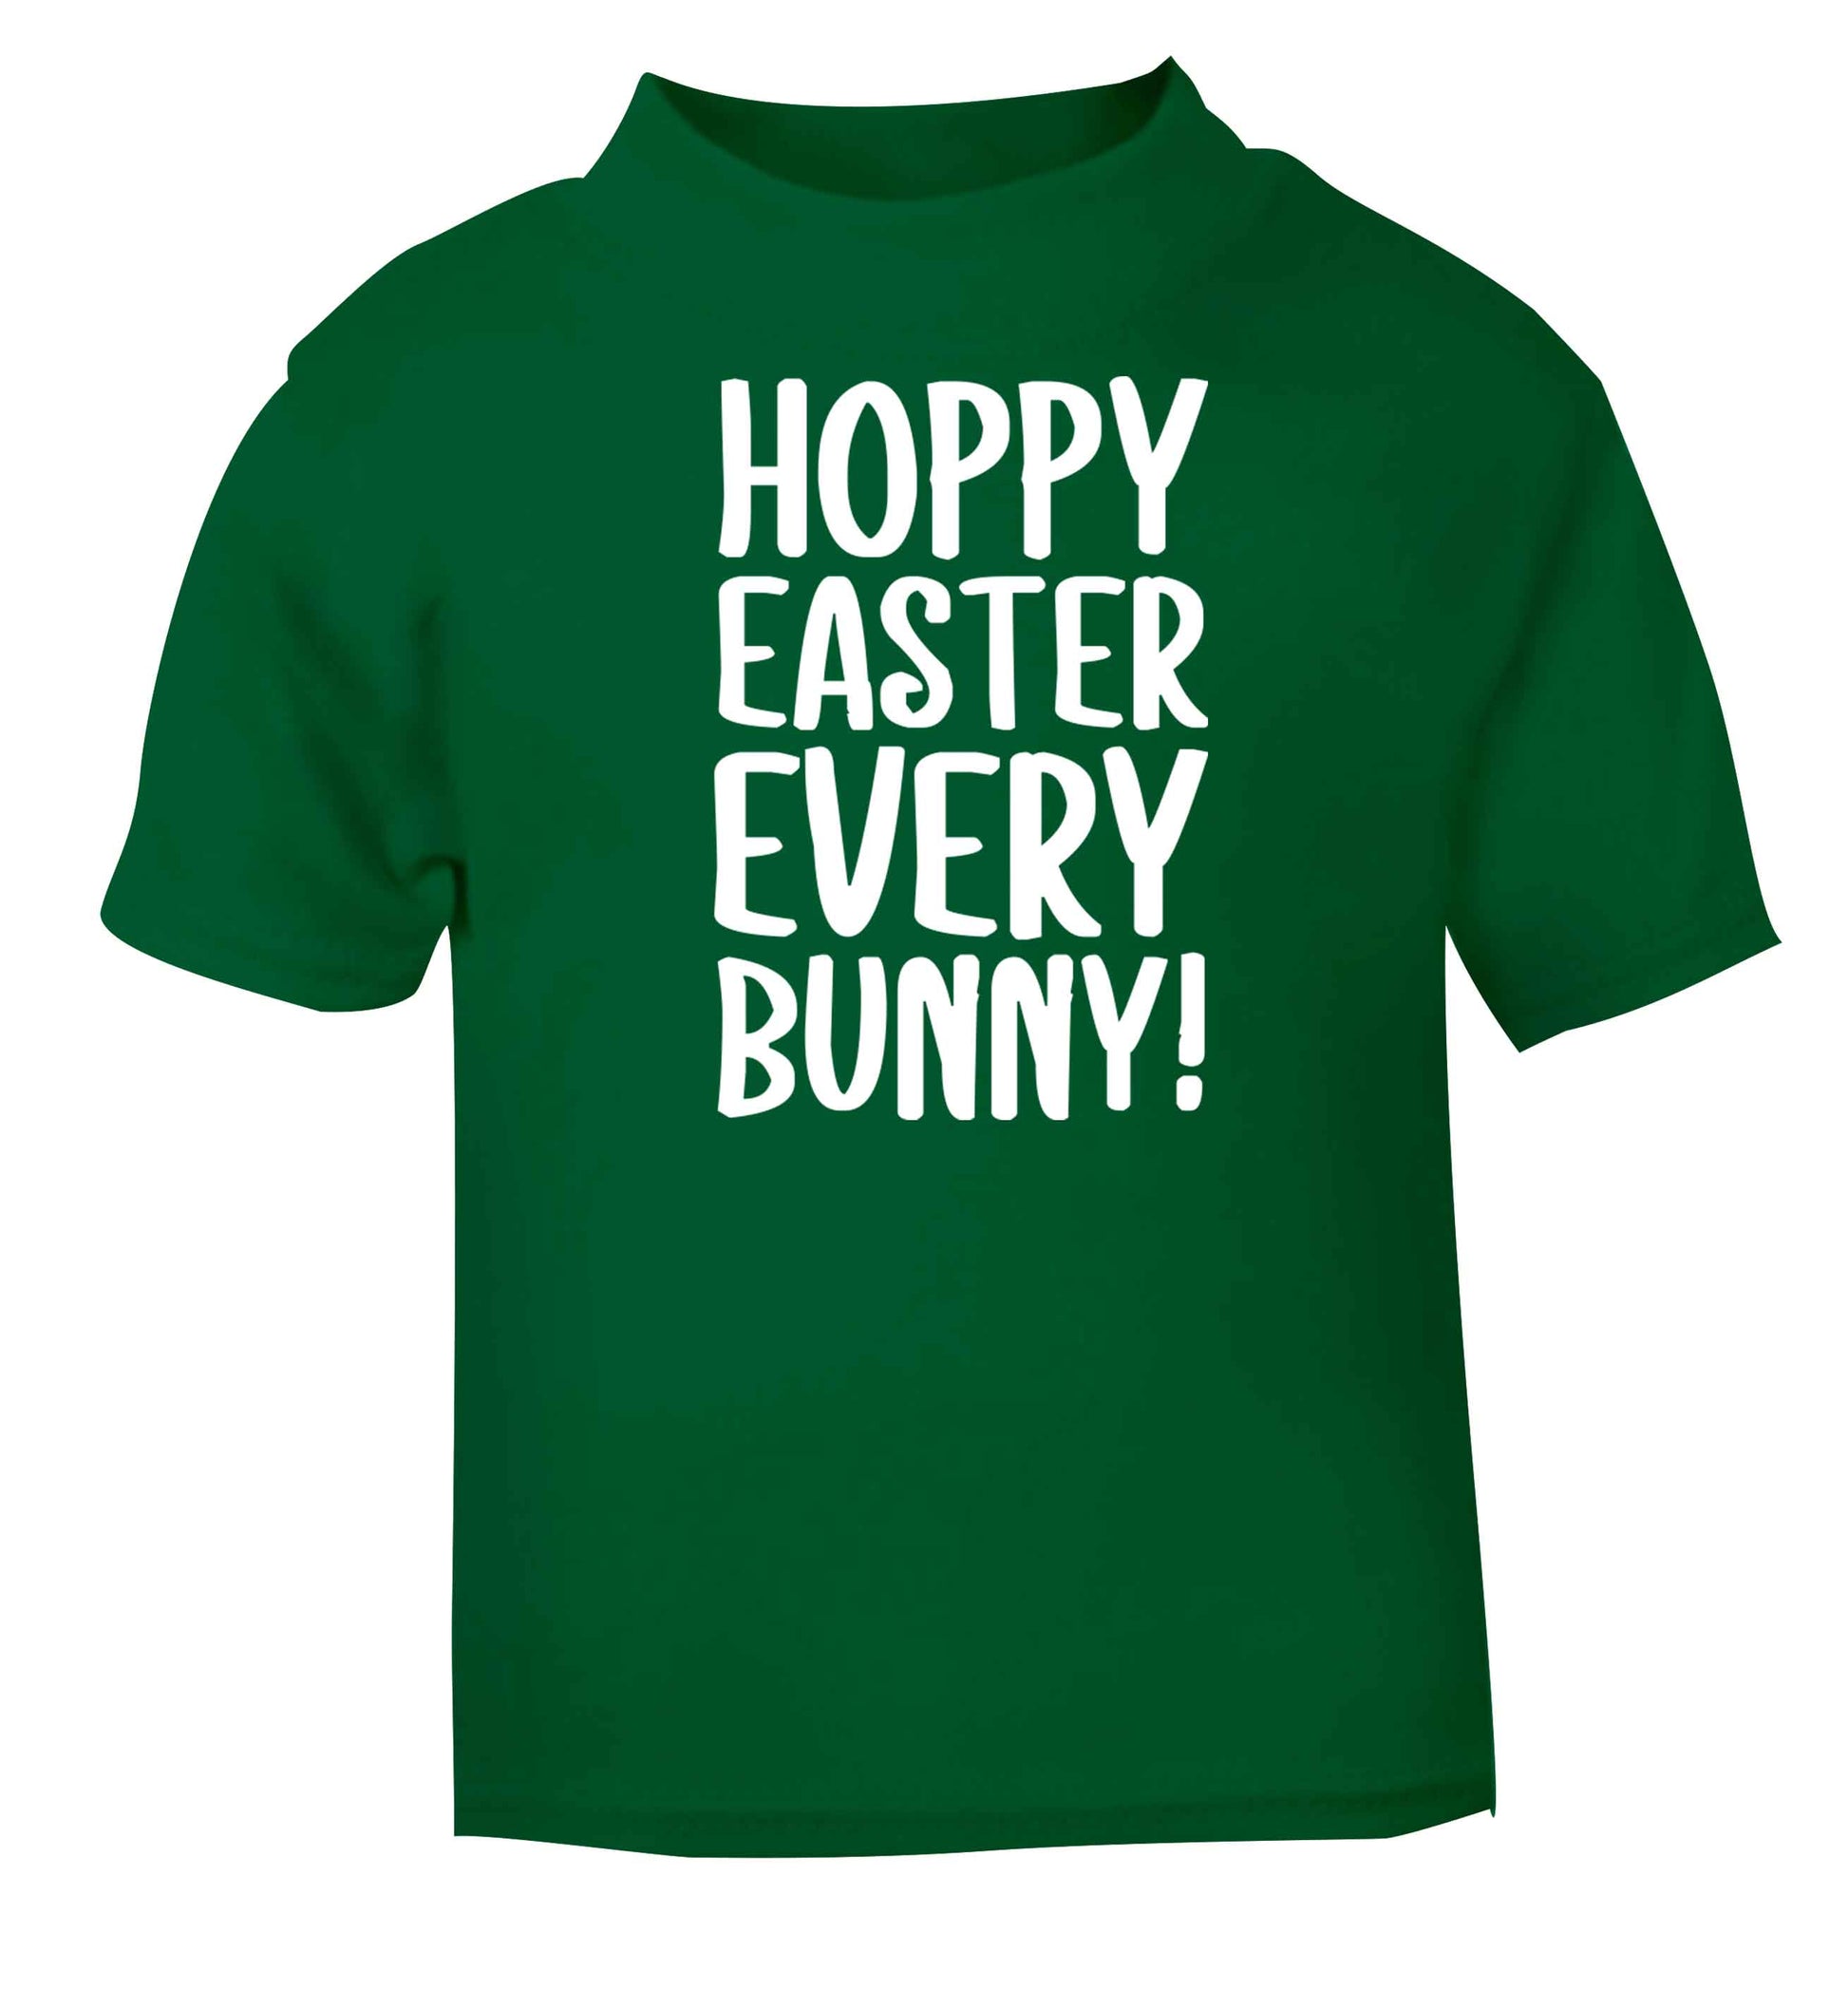 Hoppy Easter every bunny! green baby toddler Tshirt 2 Years